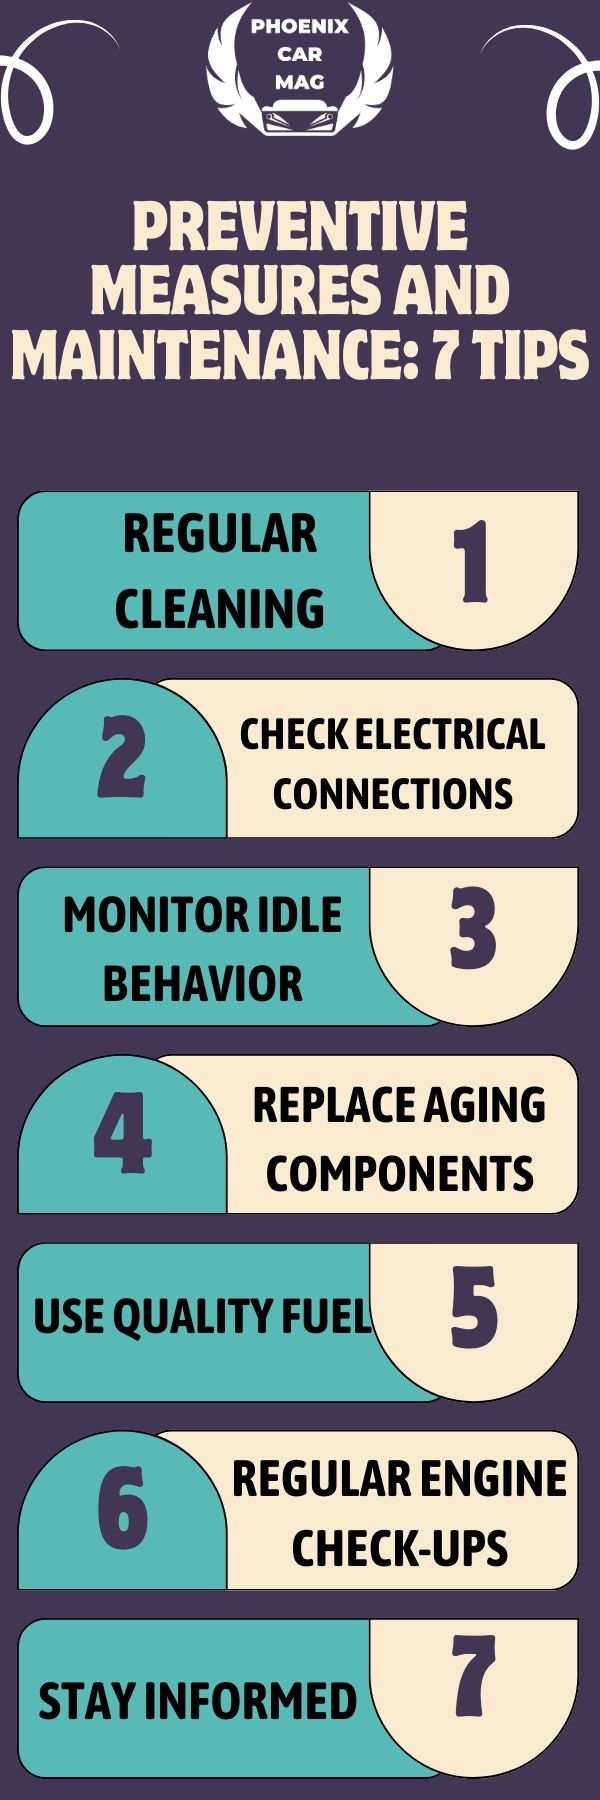 infographic for Preventive Measures and Maintenance: 7 Tips